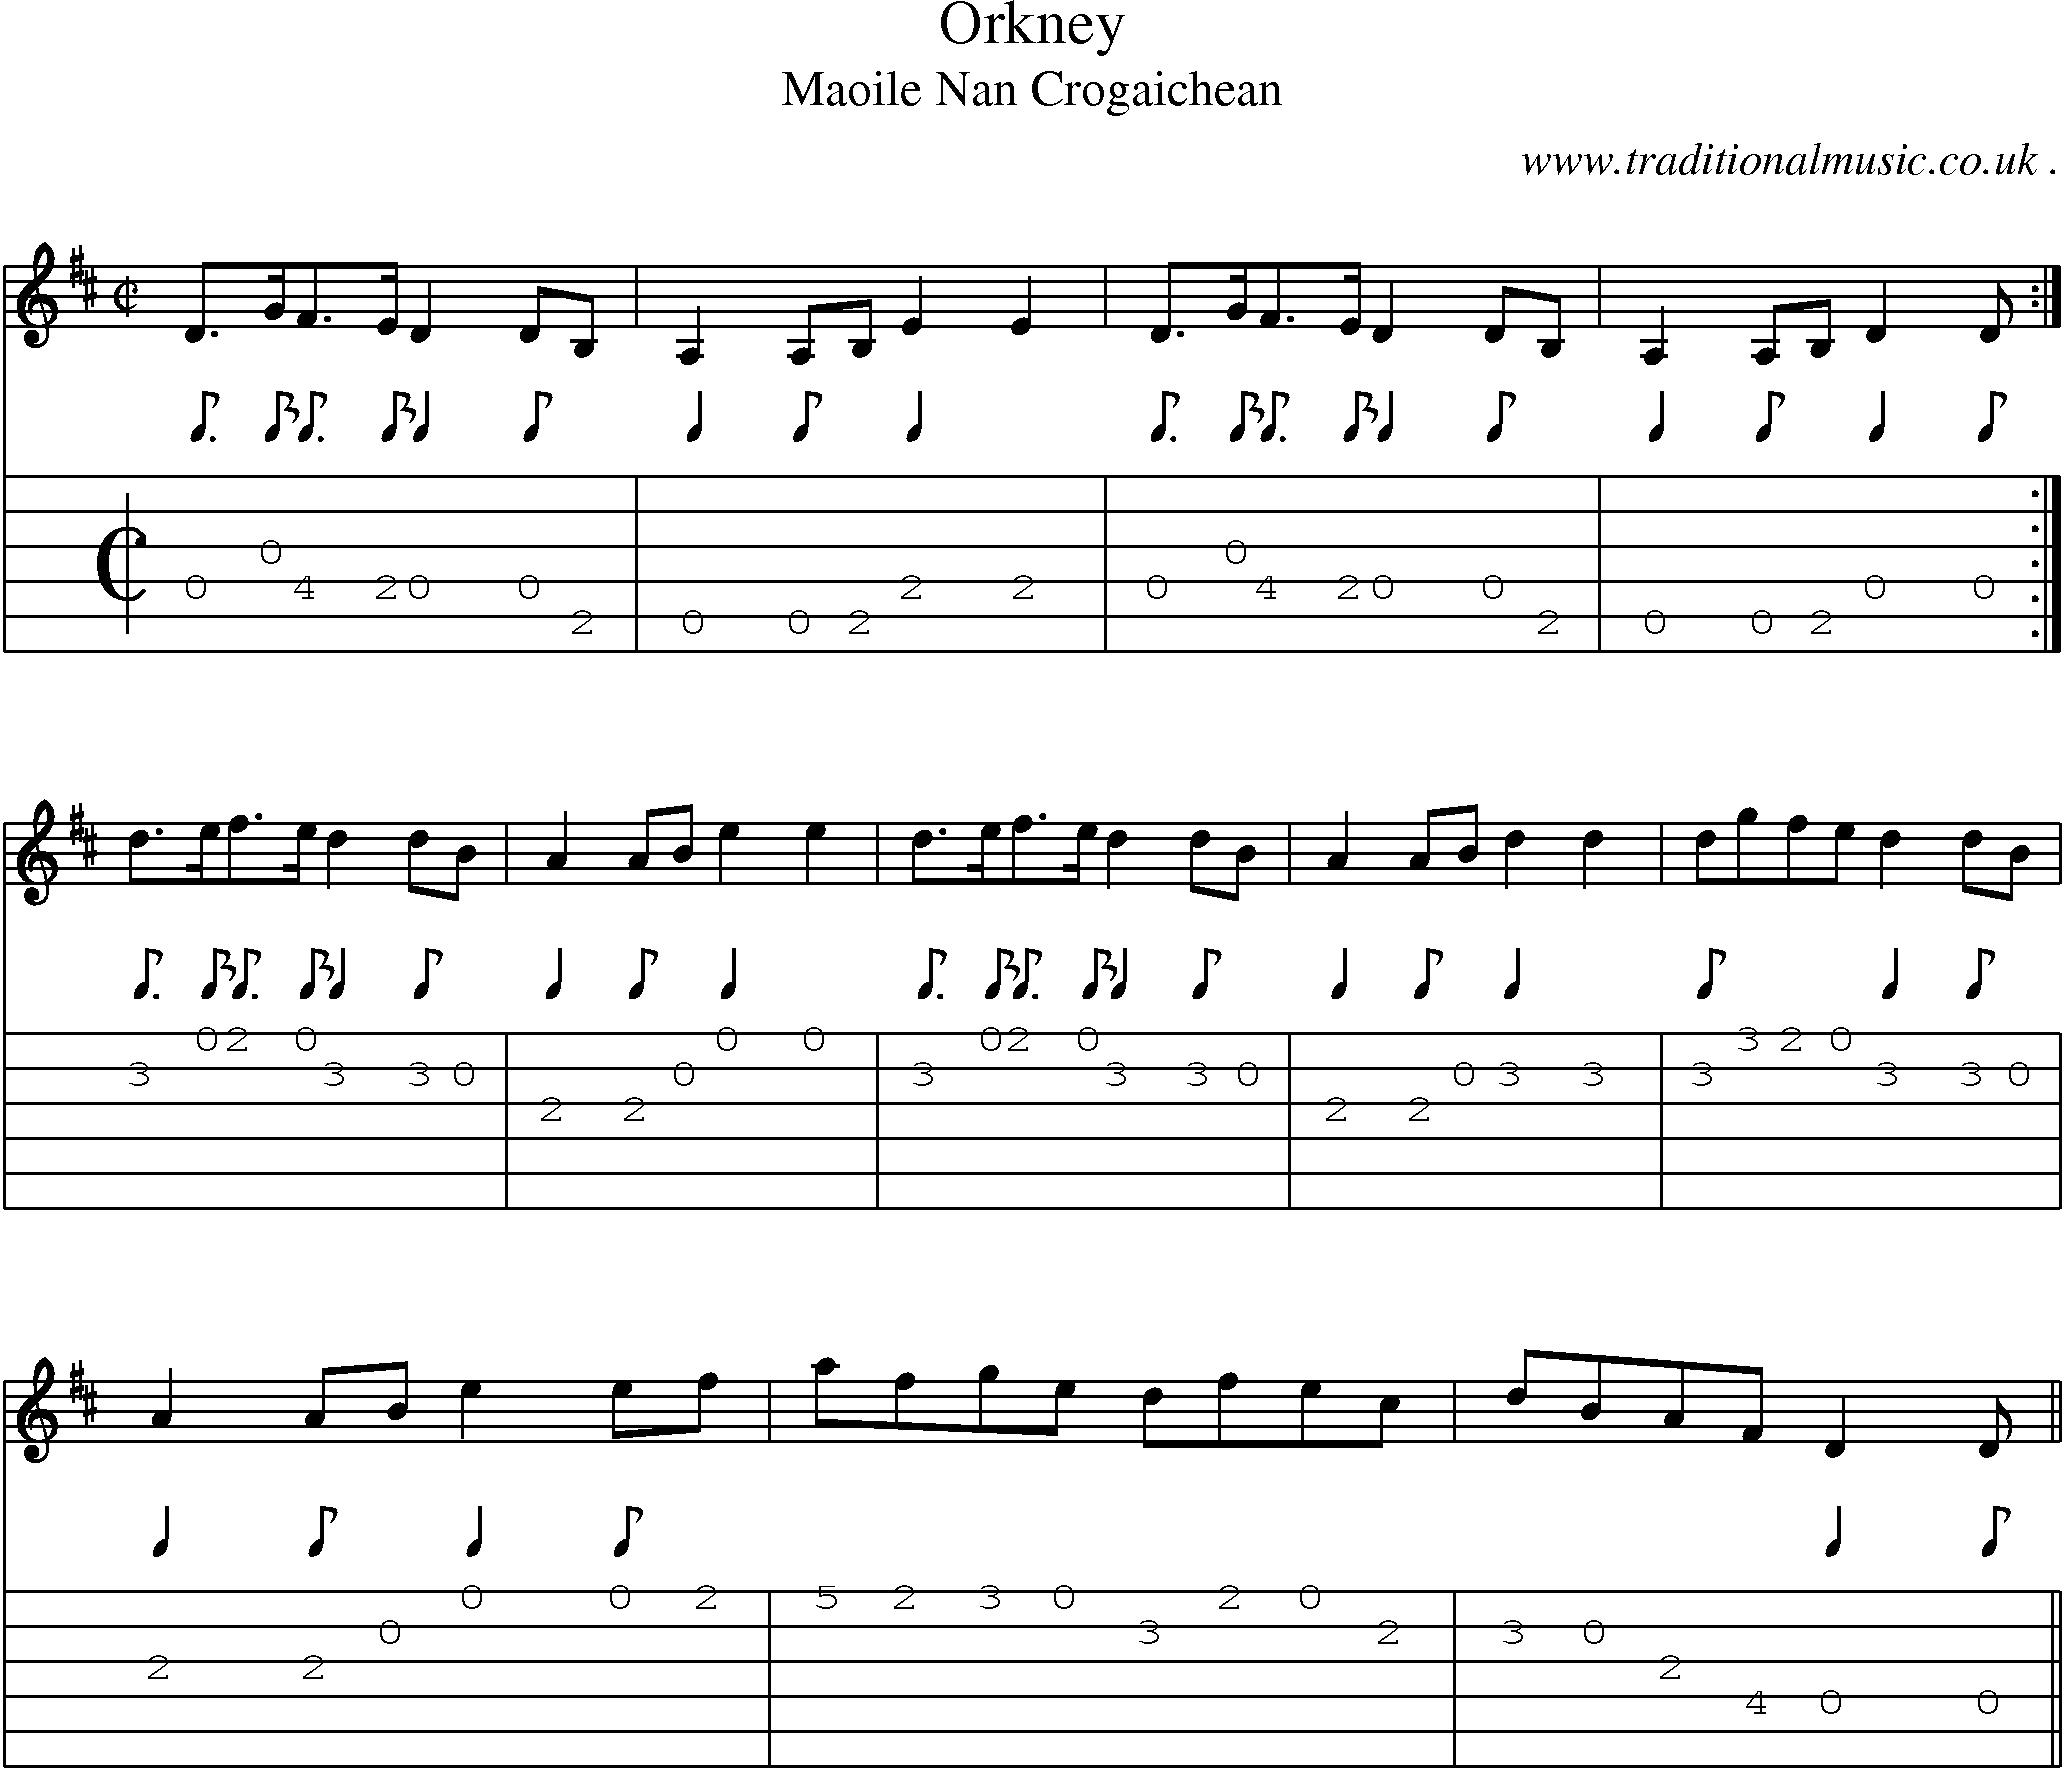 Sheet-music  score, Chords and Guitar Tabs for Orkney